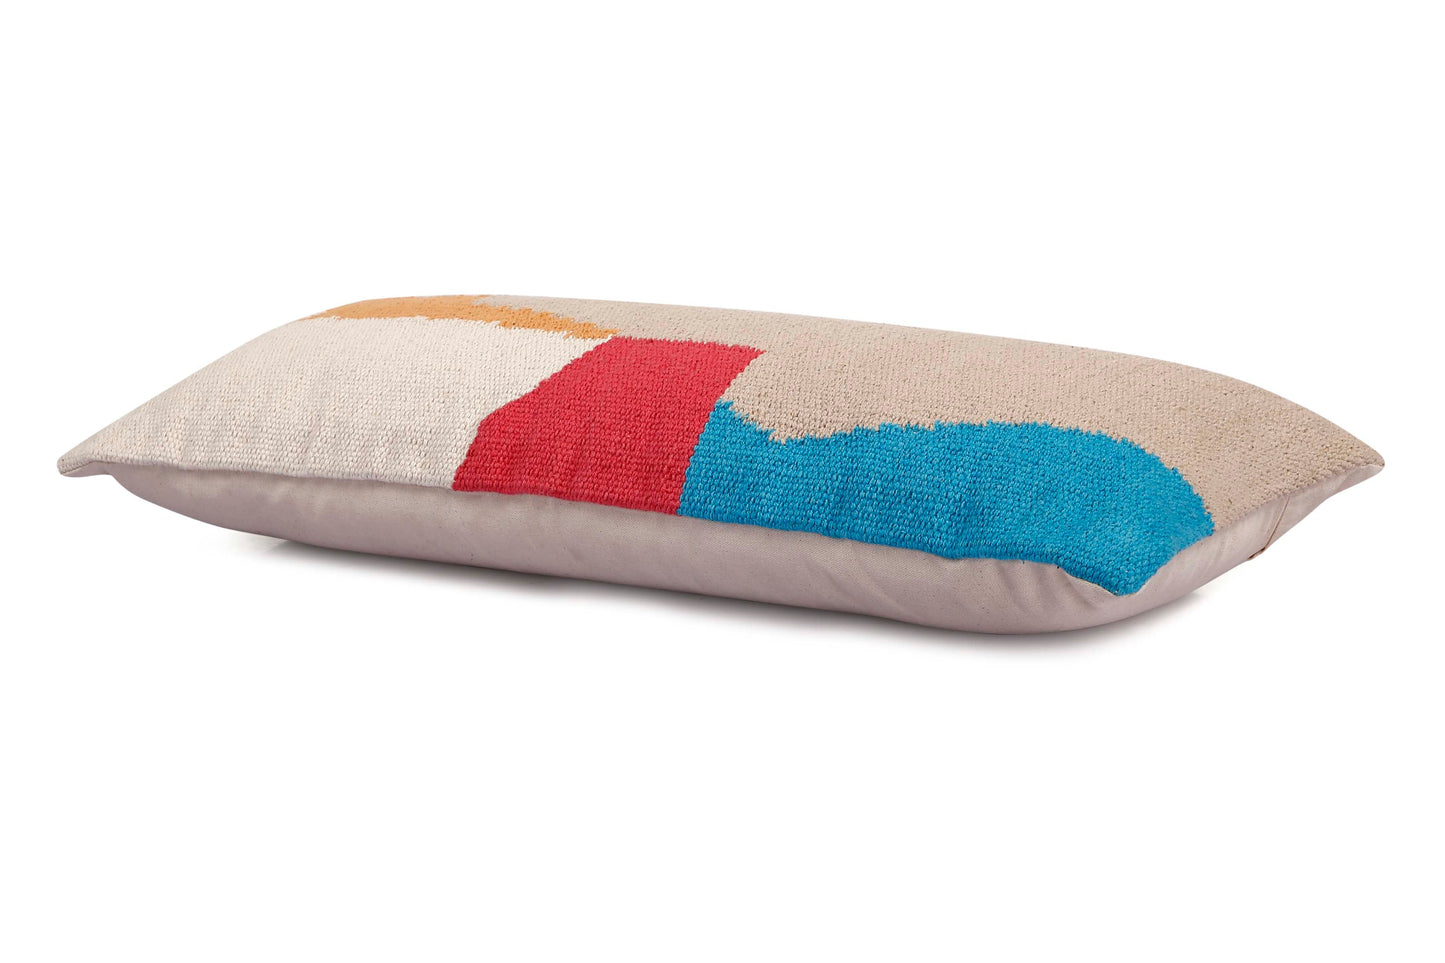 Leh Handcrafted Lumbar Pillow, Multi- 12x30 Inch by The Artisen - Sumiye Co